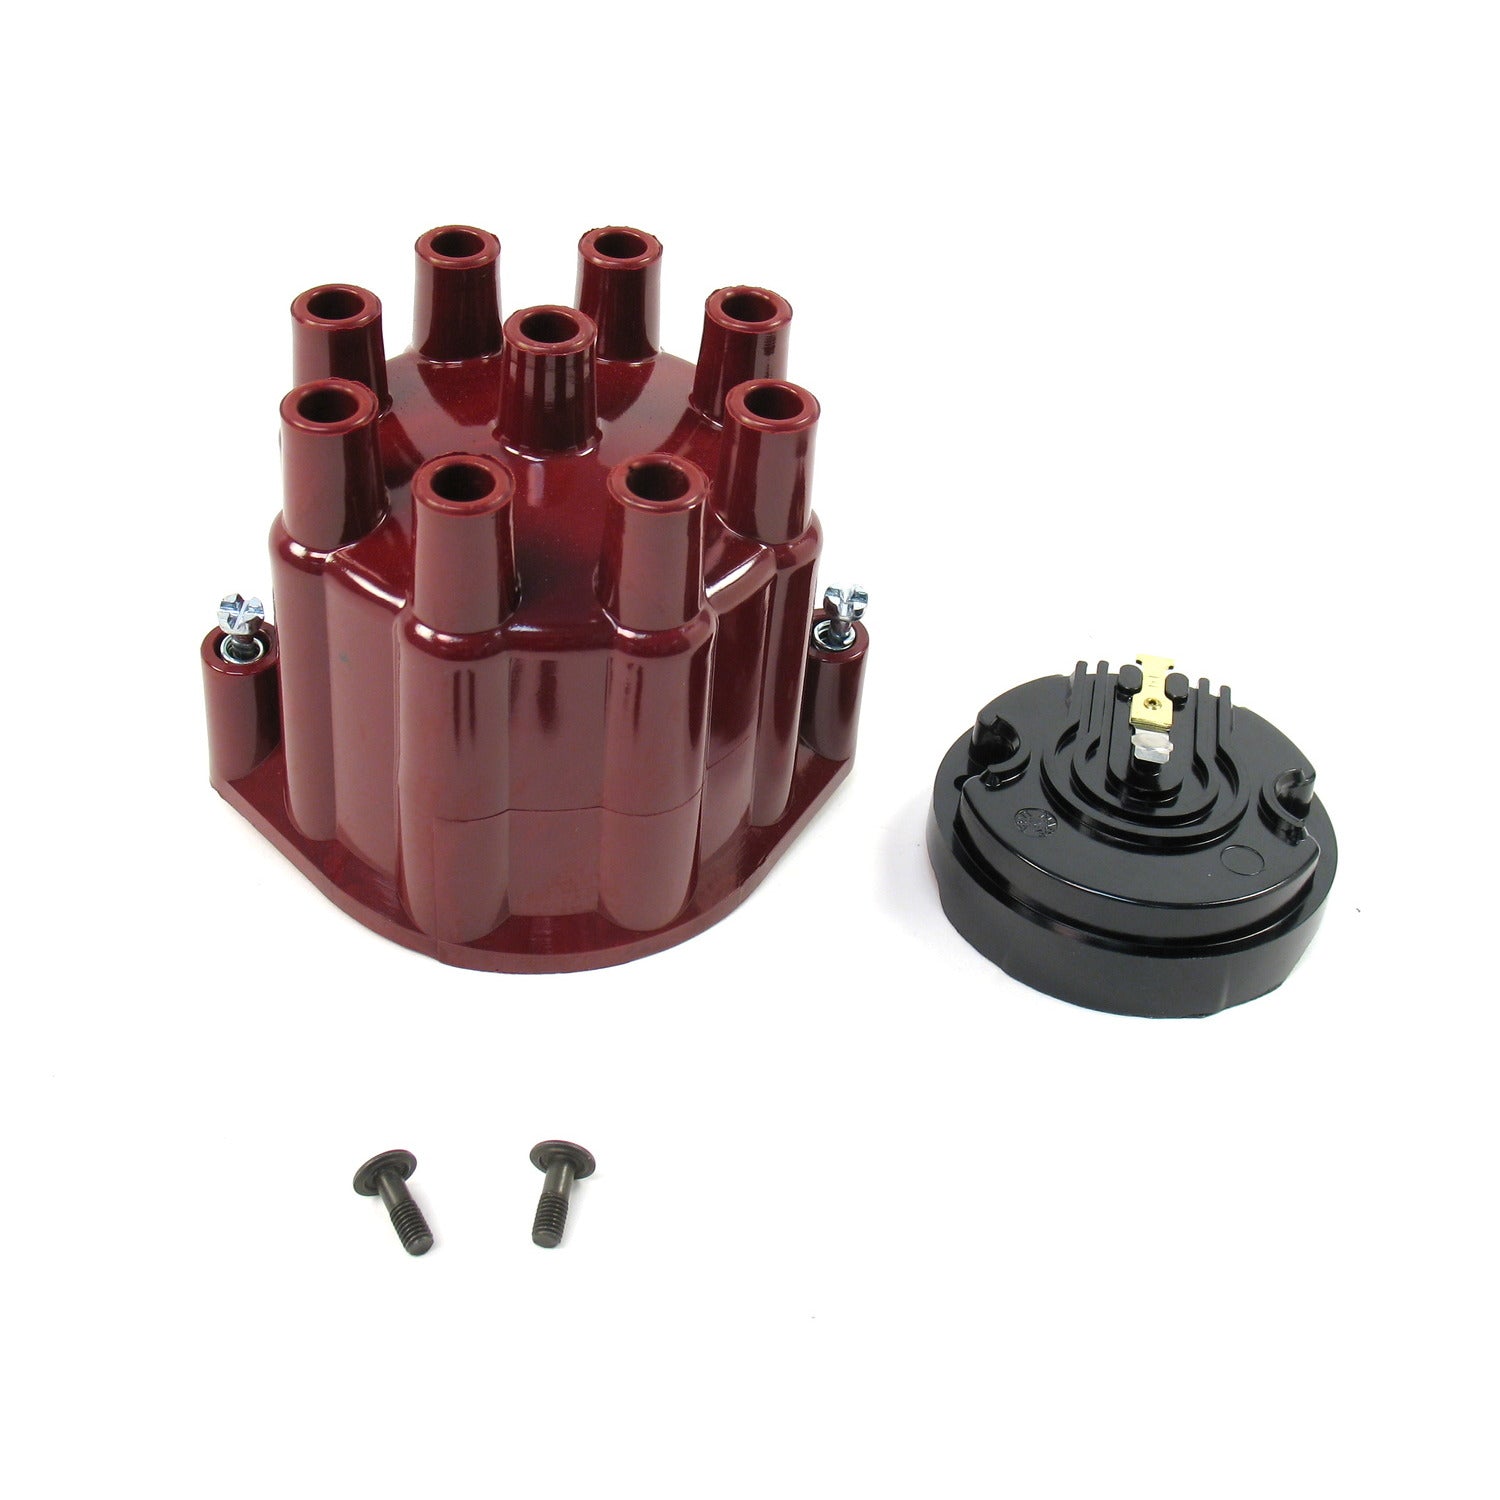 PerTronix D600701 Cap Red and Rotor 8 cylinder Flame-Thrower Billet Distributor